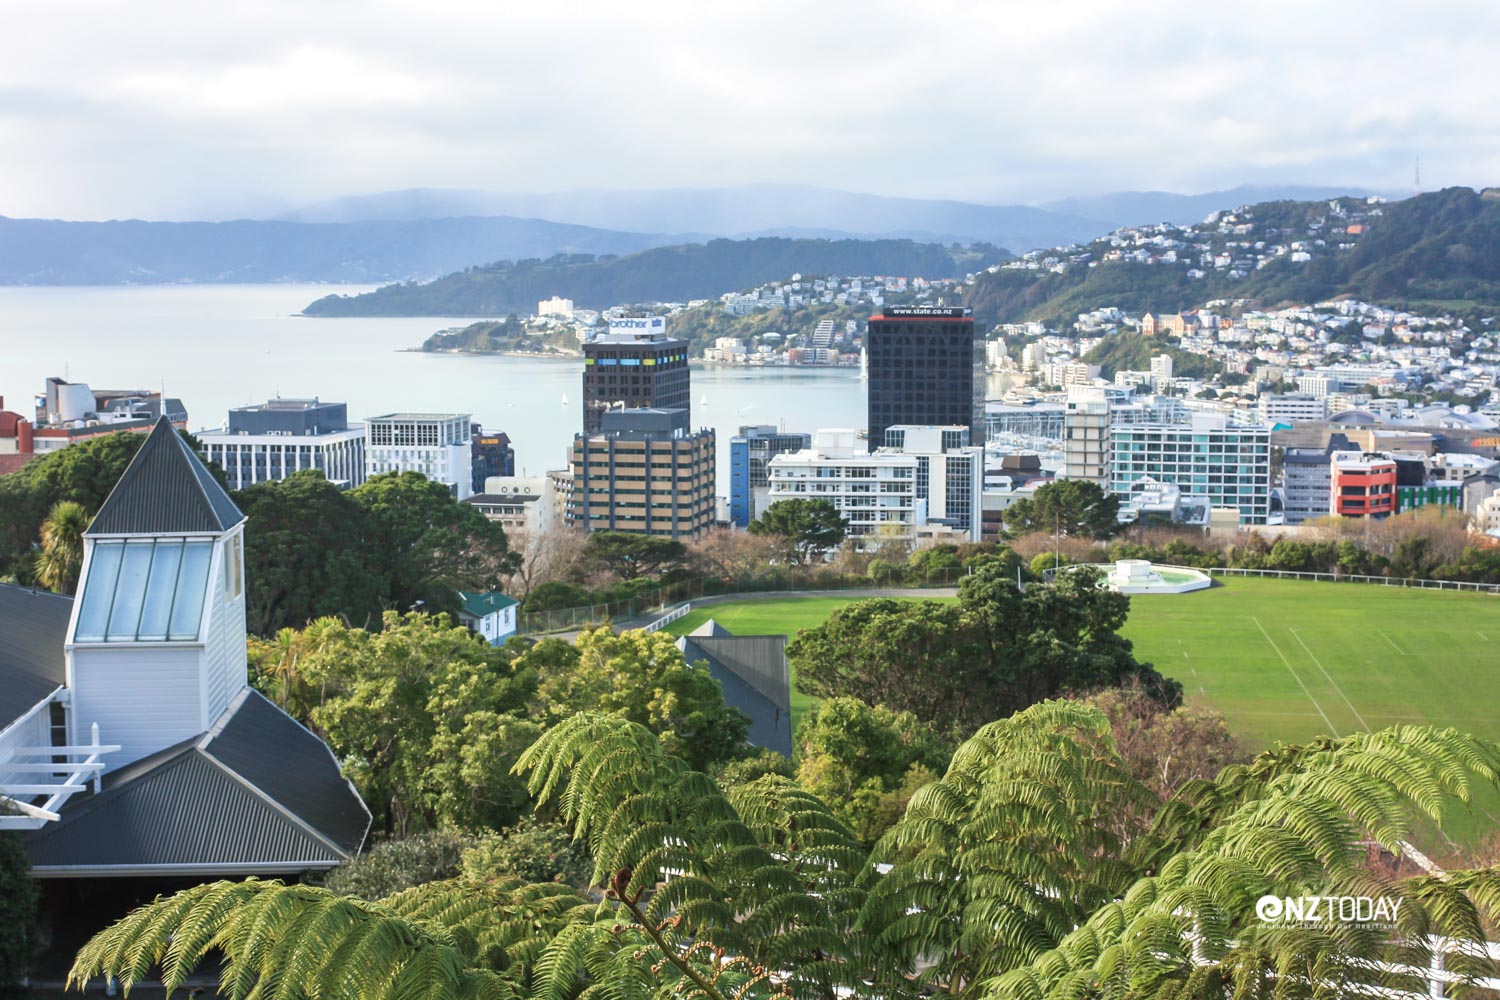 Expansive views of Wellington Harbour from the cable car are truly memorable